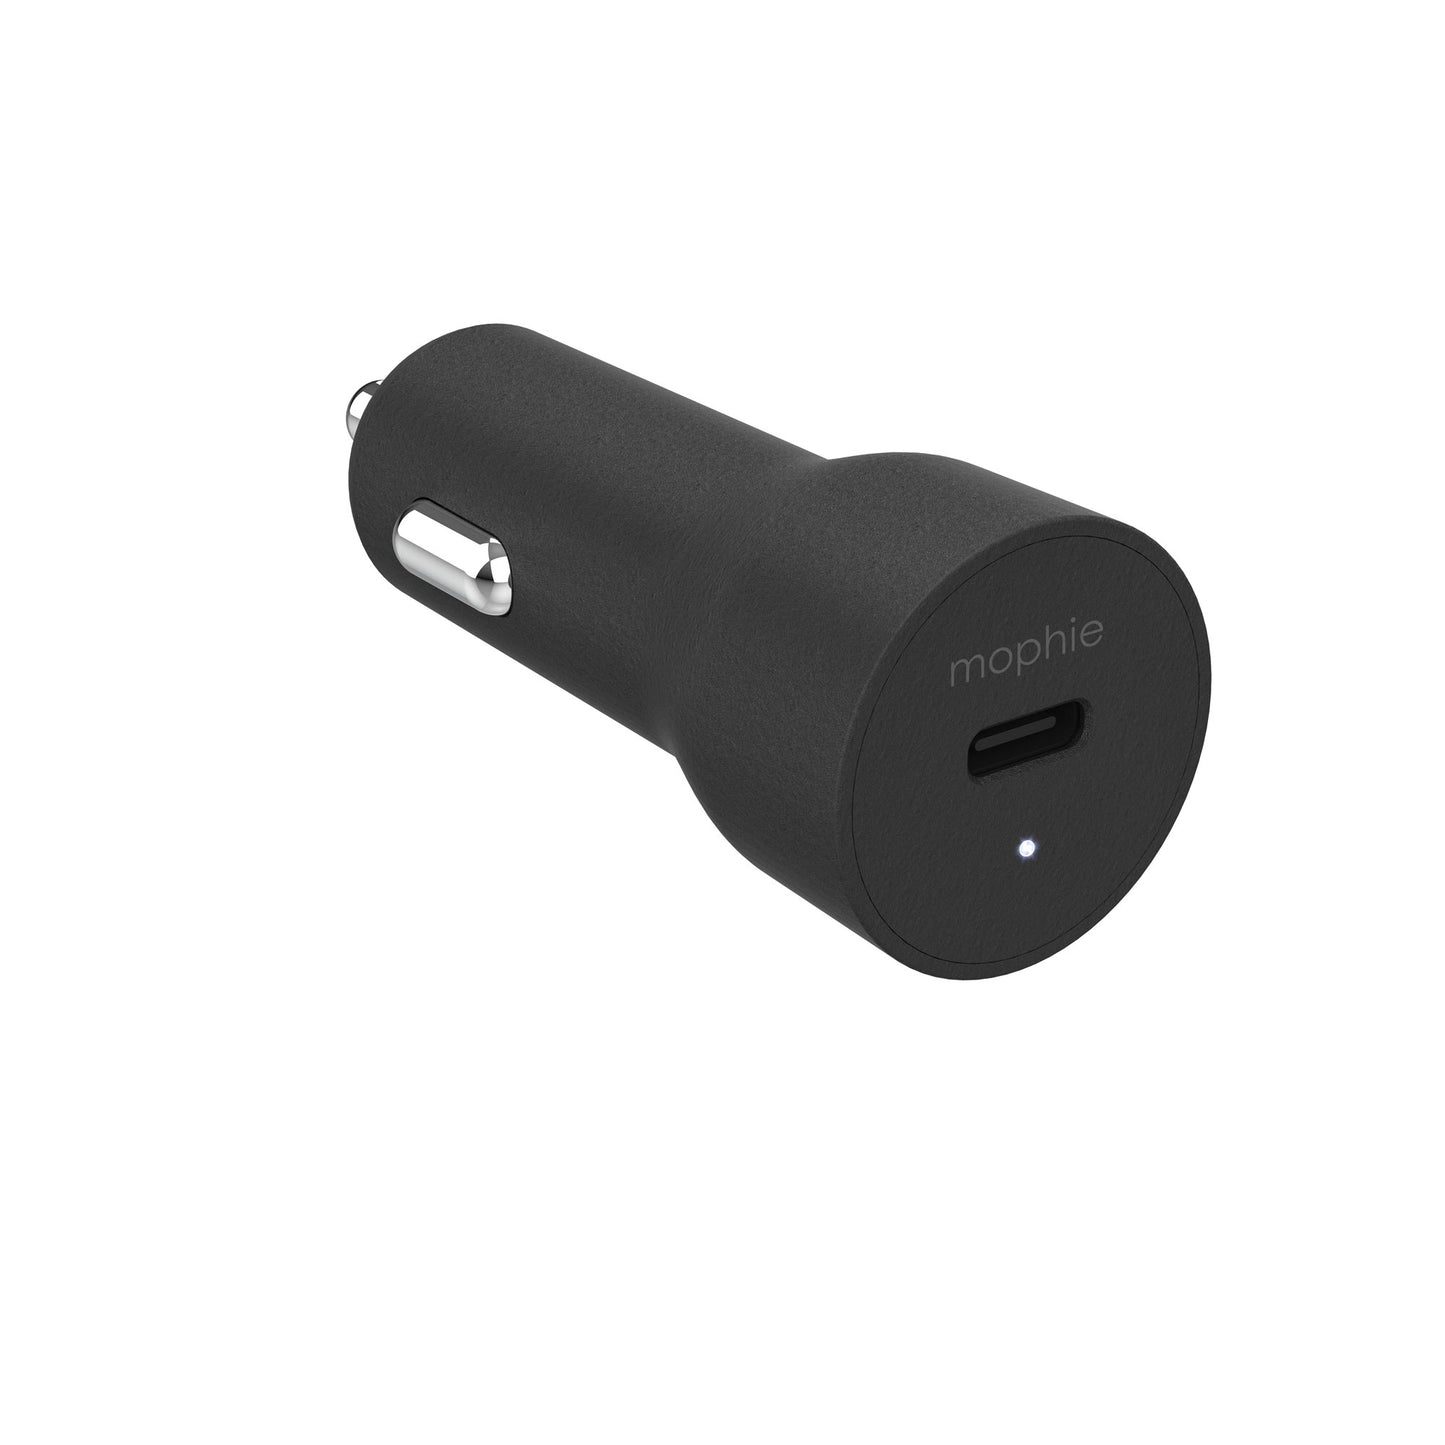 Mophie Car Charger - Accelerated Charging for USB-C Devices - Kixup Repairs